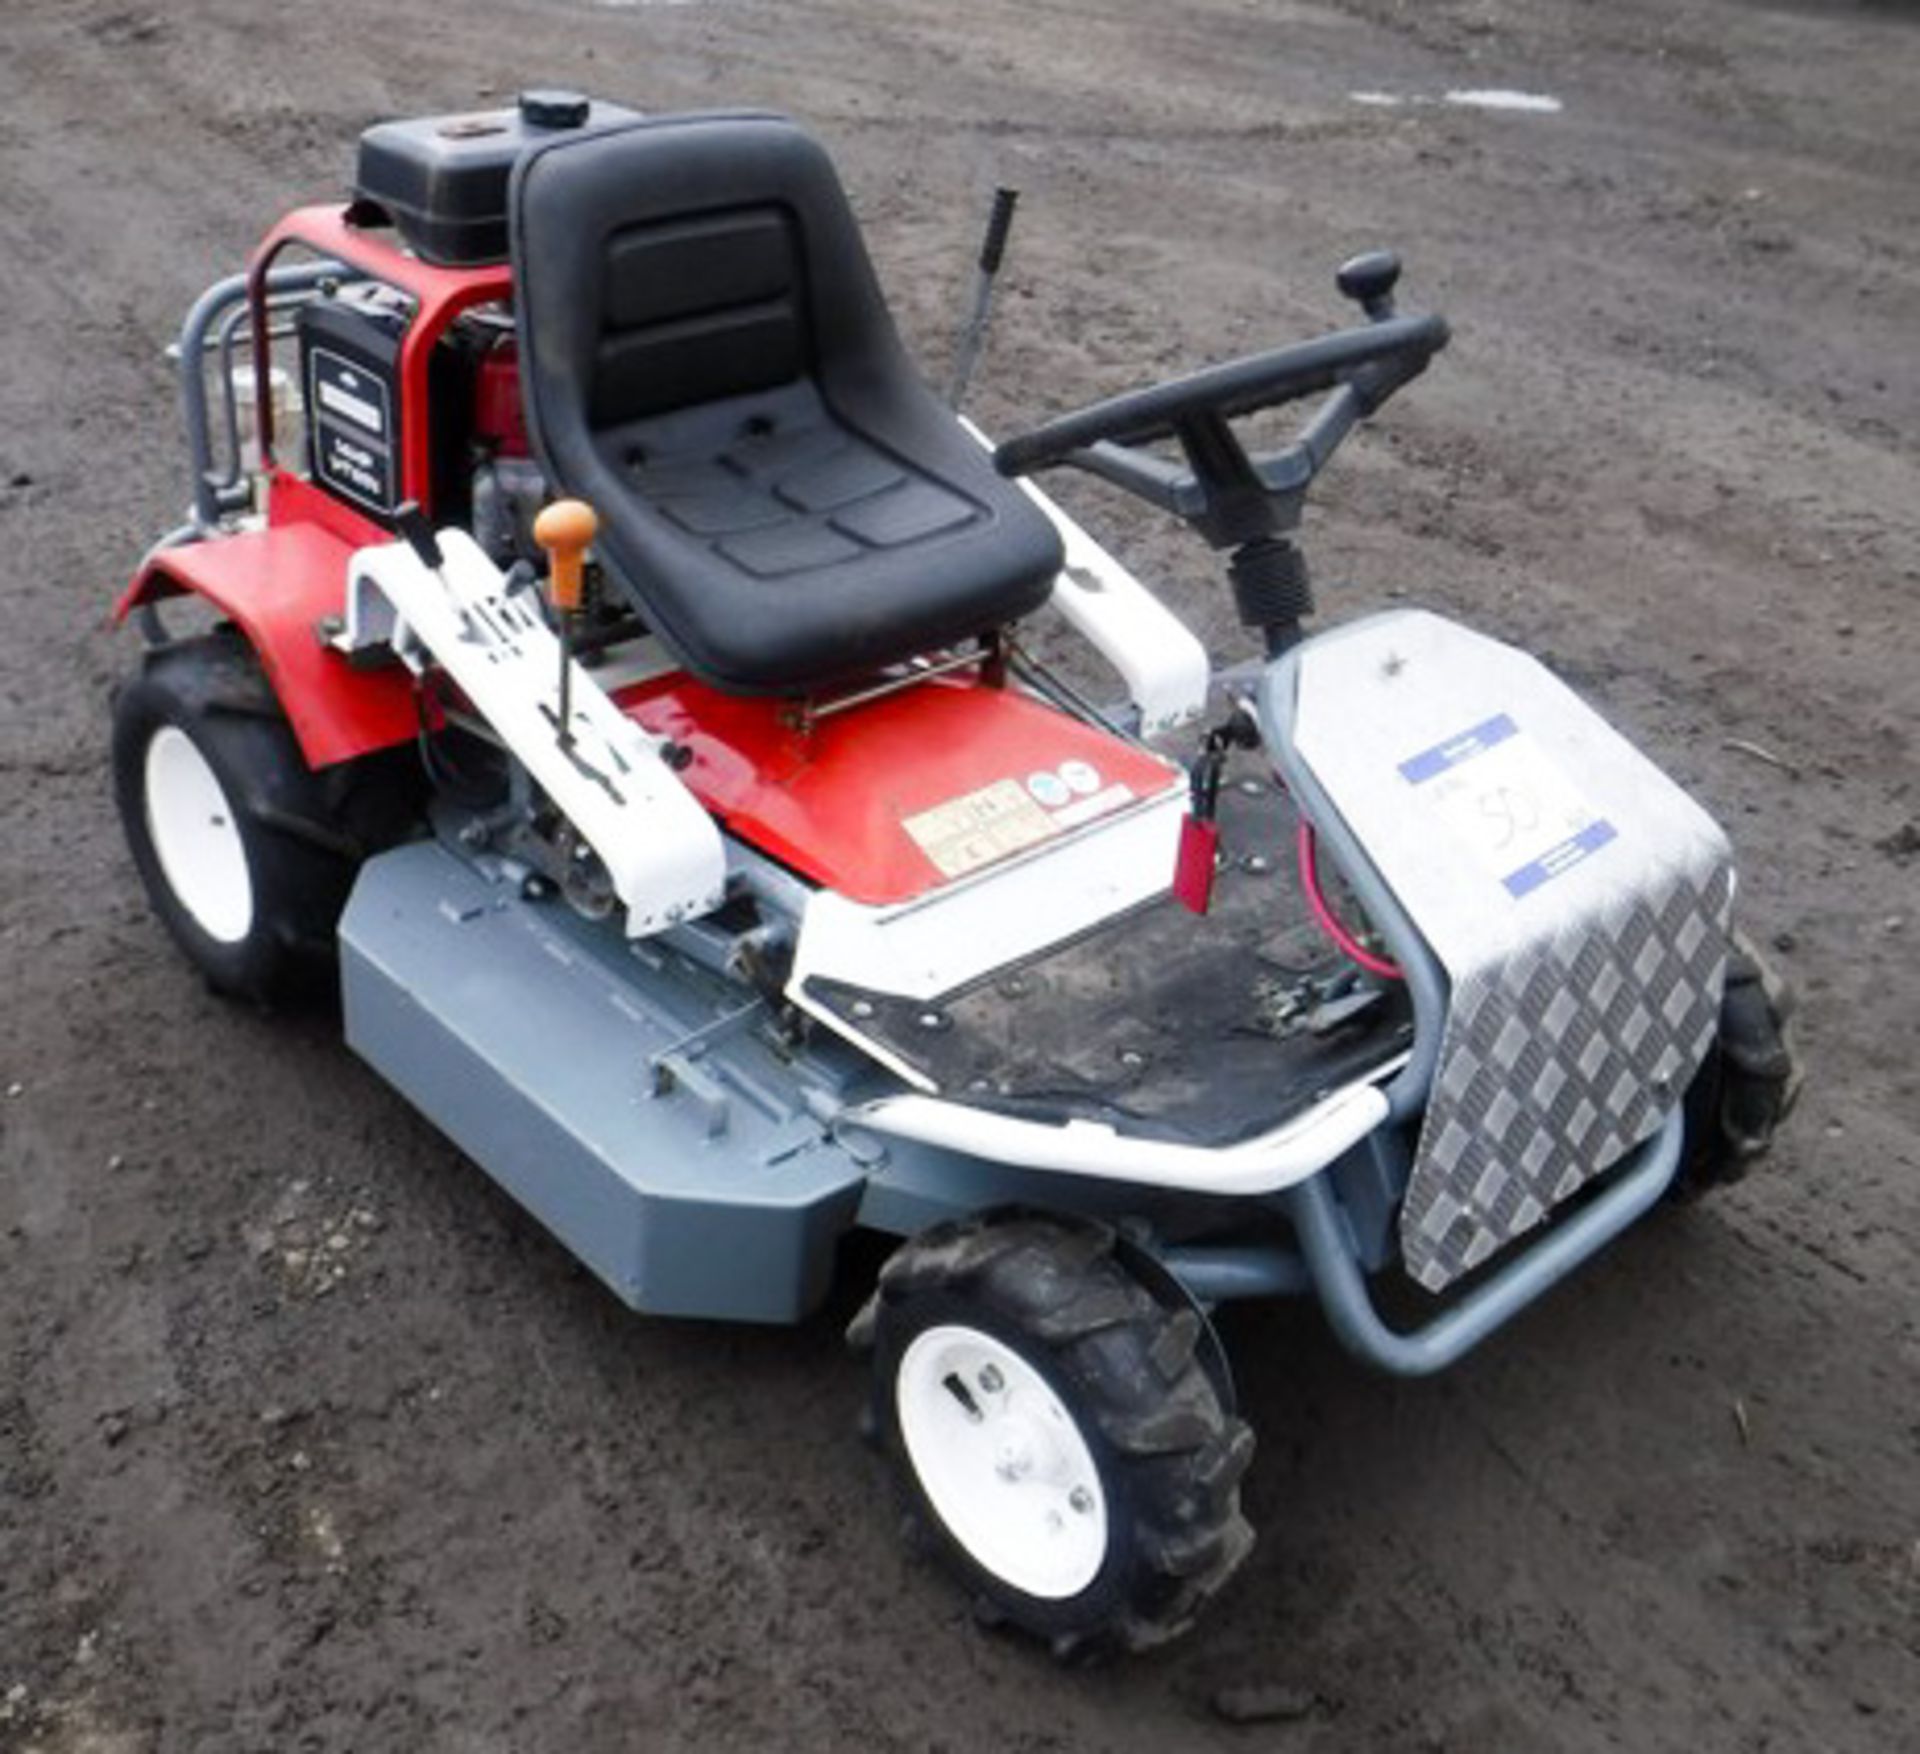 OREC HST CLIMBER BANK MOWER 14HP V TWIN ENGINE 40" CUT HYDROSTATIC DRIVE THIS MACHINE WILL CUT HEAVY - Image 2 of 8